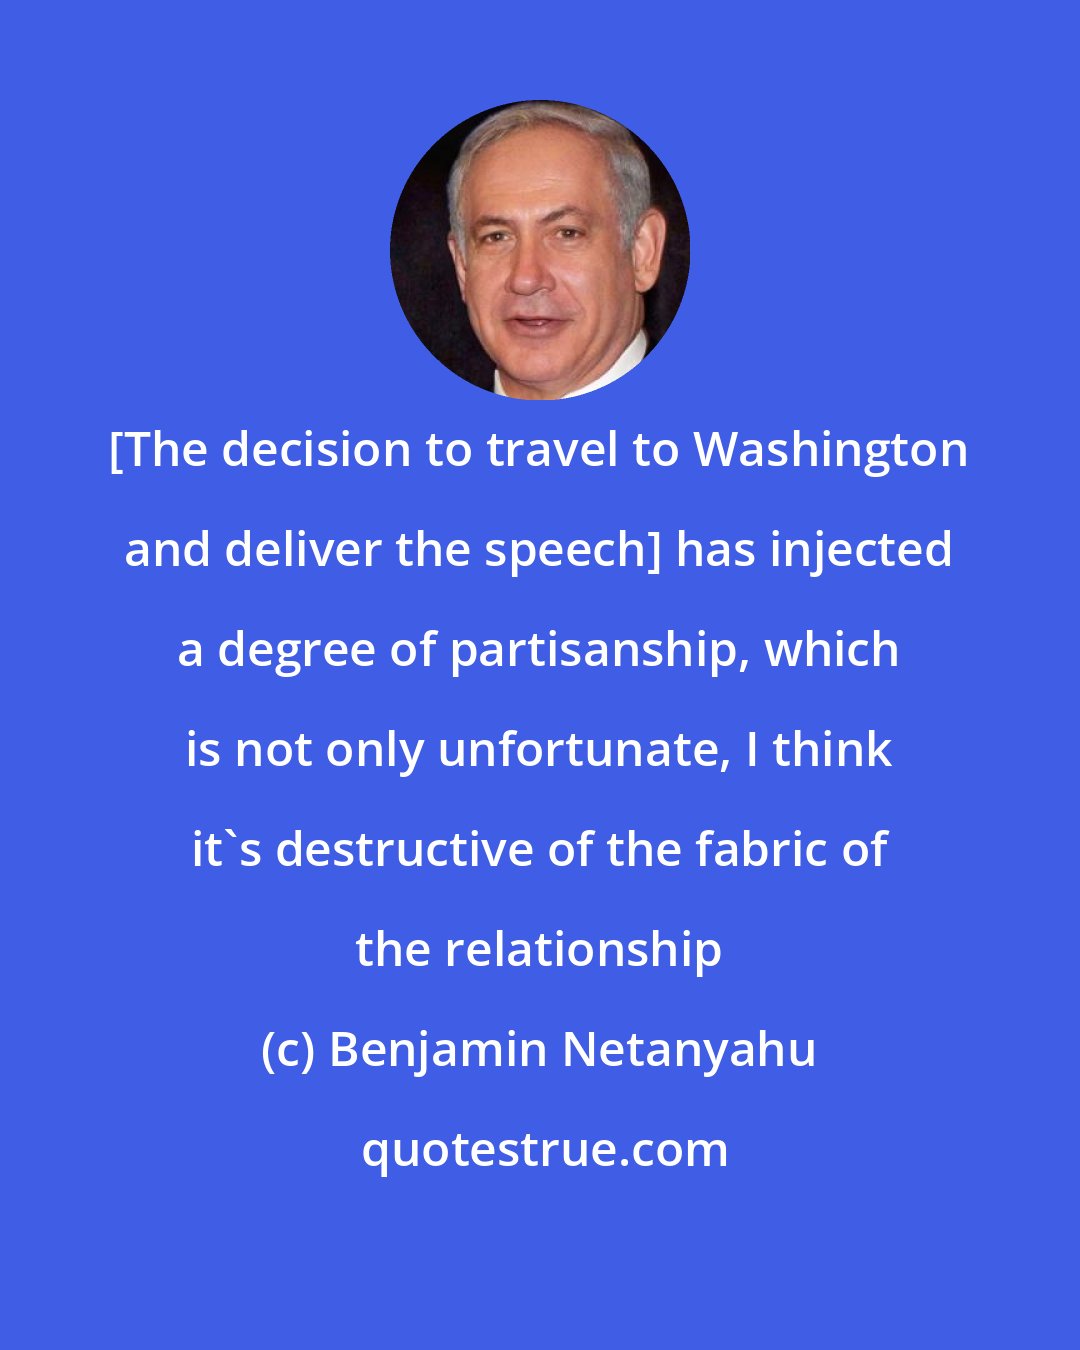 Benjamin Netanyahu: [The decision to travel to Washington and deliver the speech] has injected a degree of partisanship, which is not only unfortunate, I think it's destructive of the fabric of the relationship